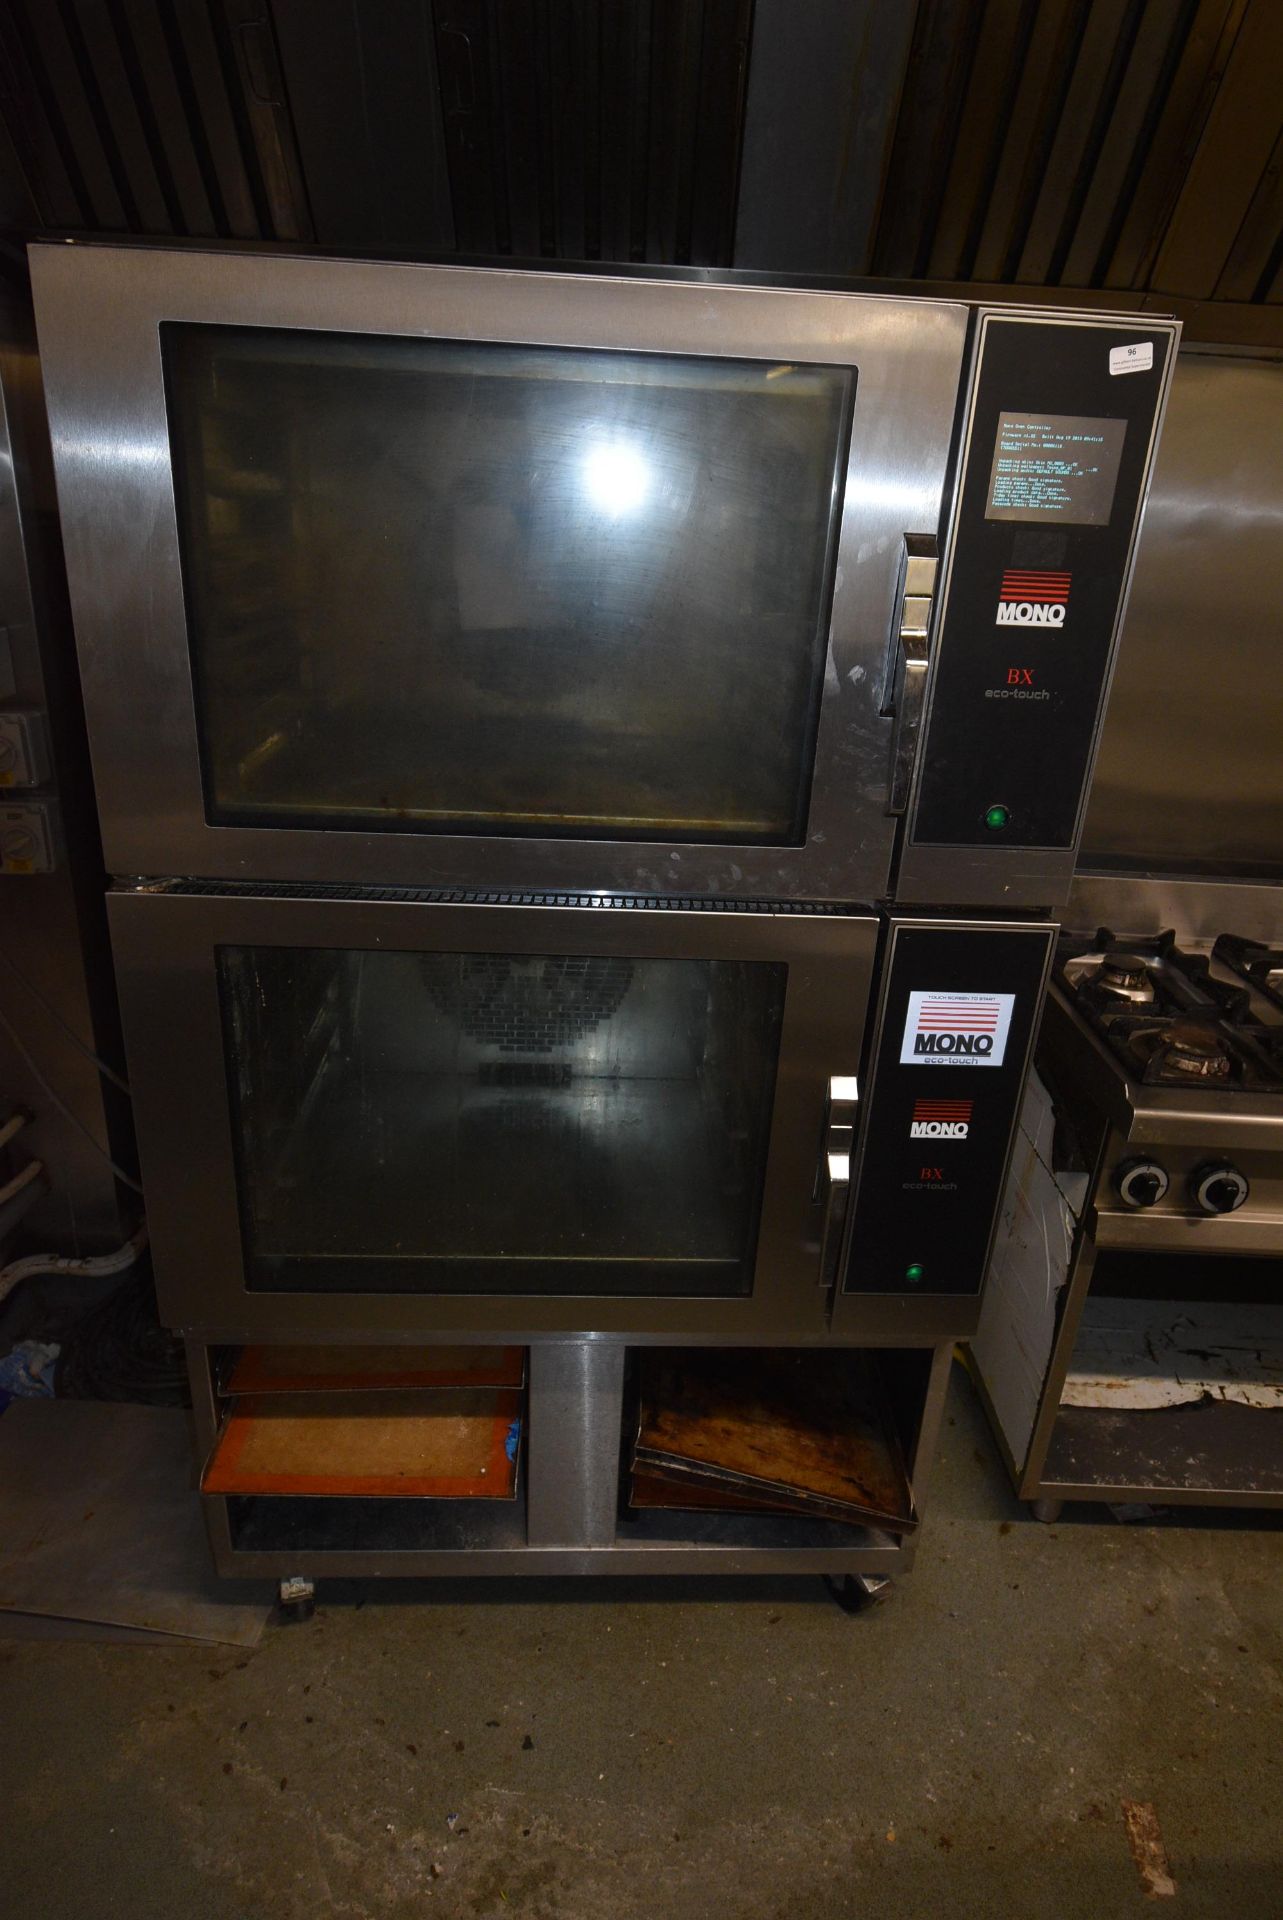 Mono BX Eco Touch Double Deck Oven